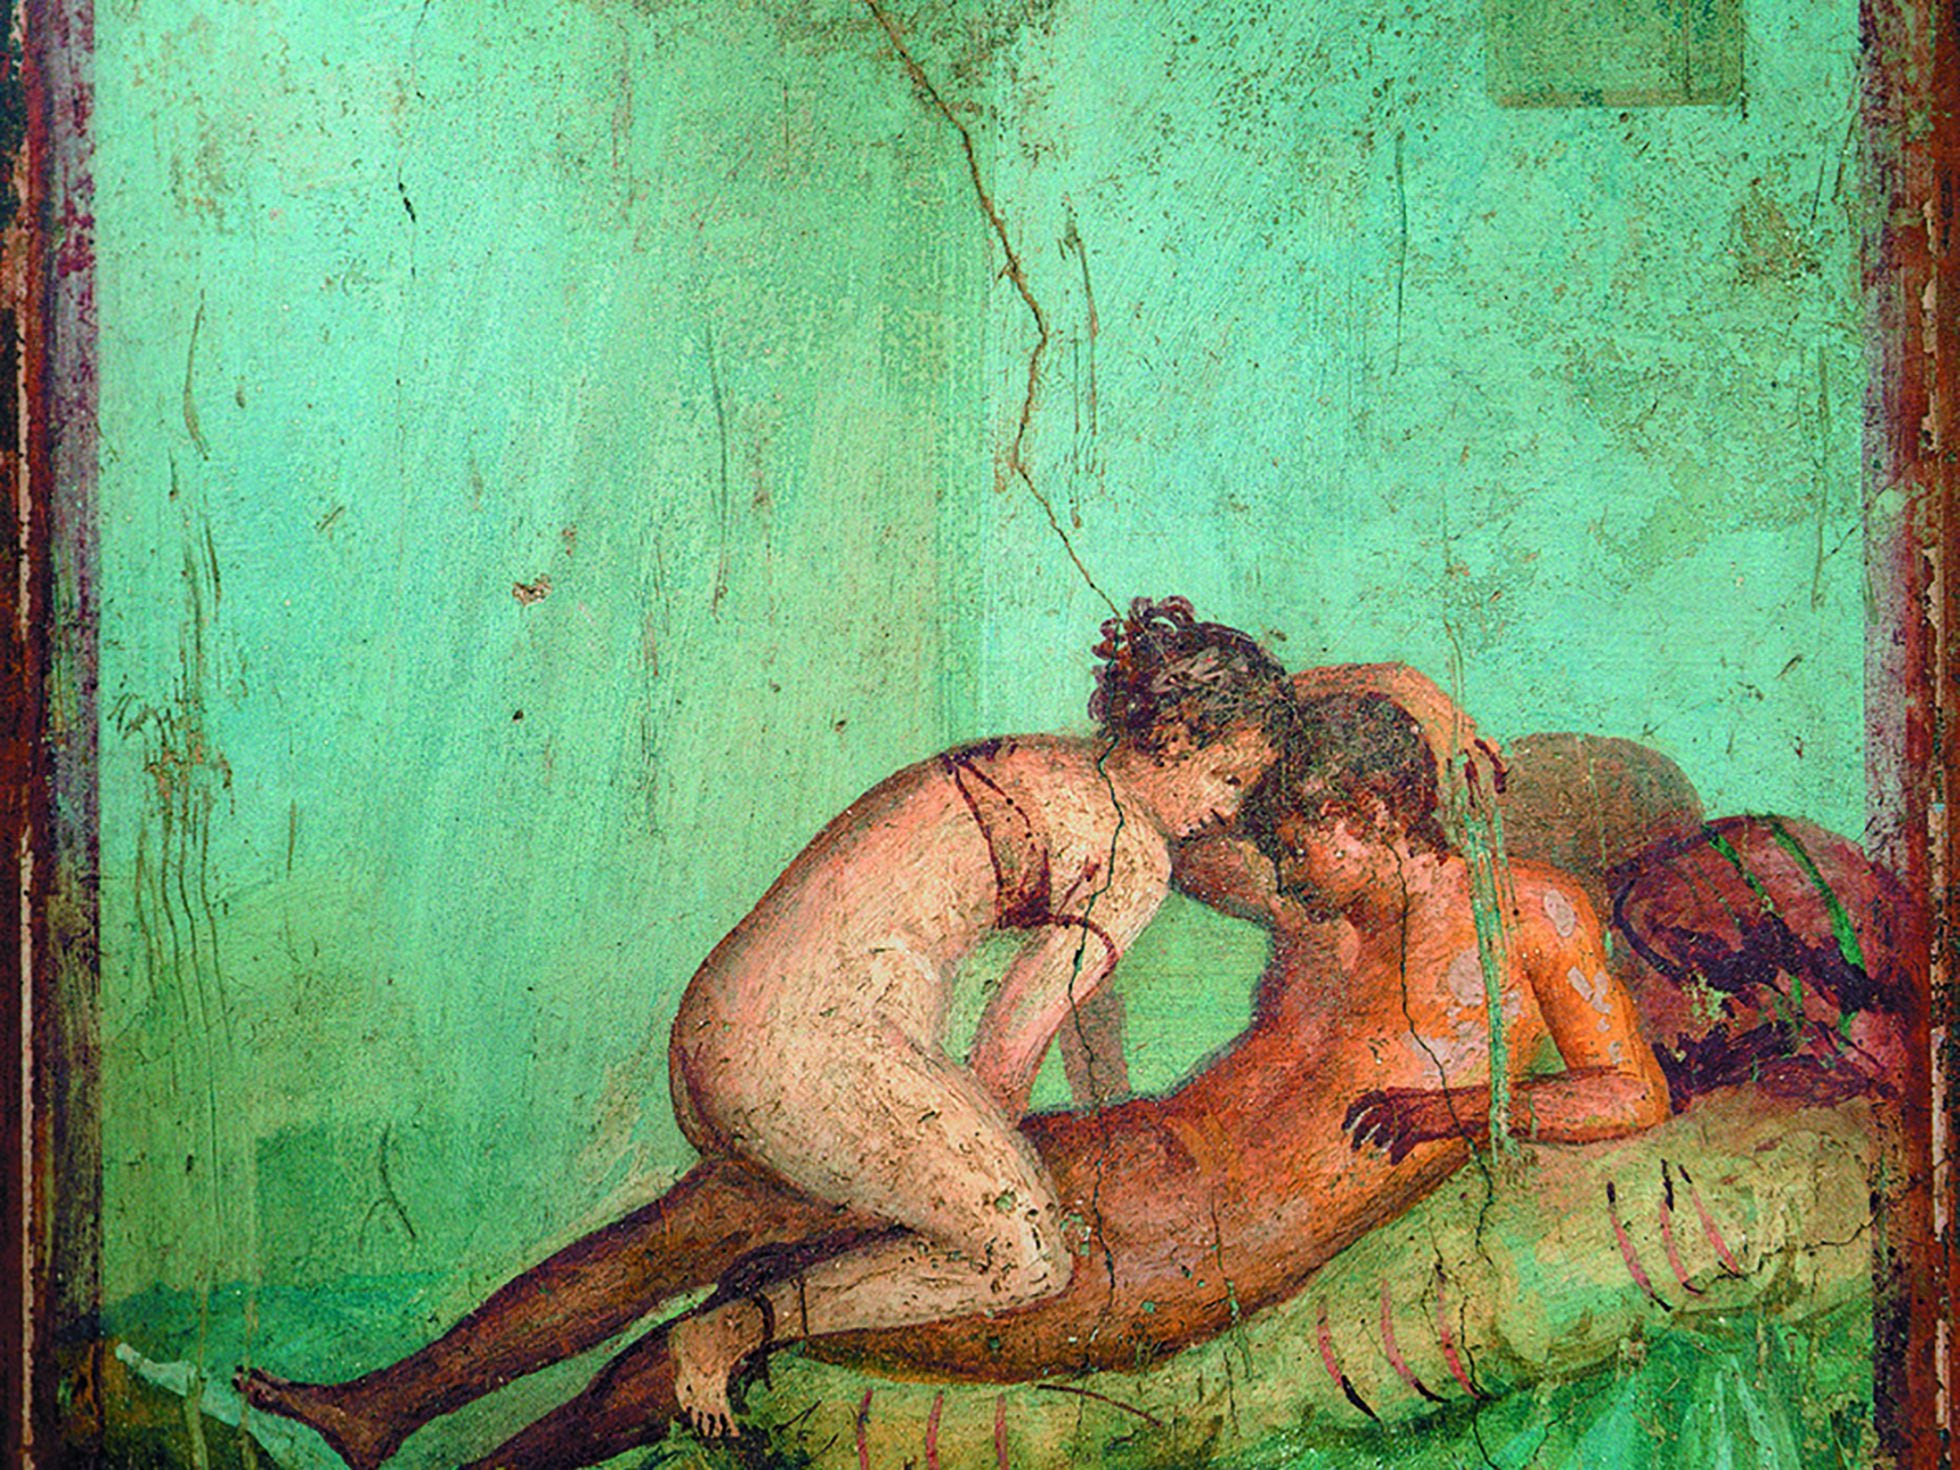 Xxx Hot Rep Wife Hasband - Sex in Ancient Rome: a violent approach to lovemaking | Culture | EL PAÃS  English